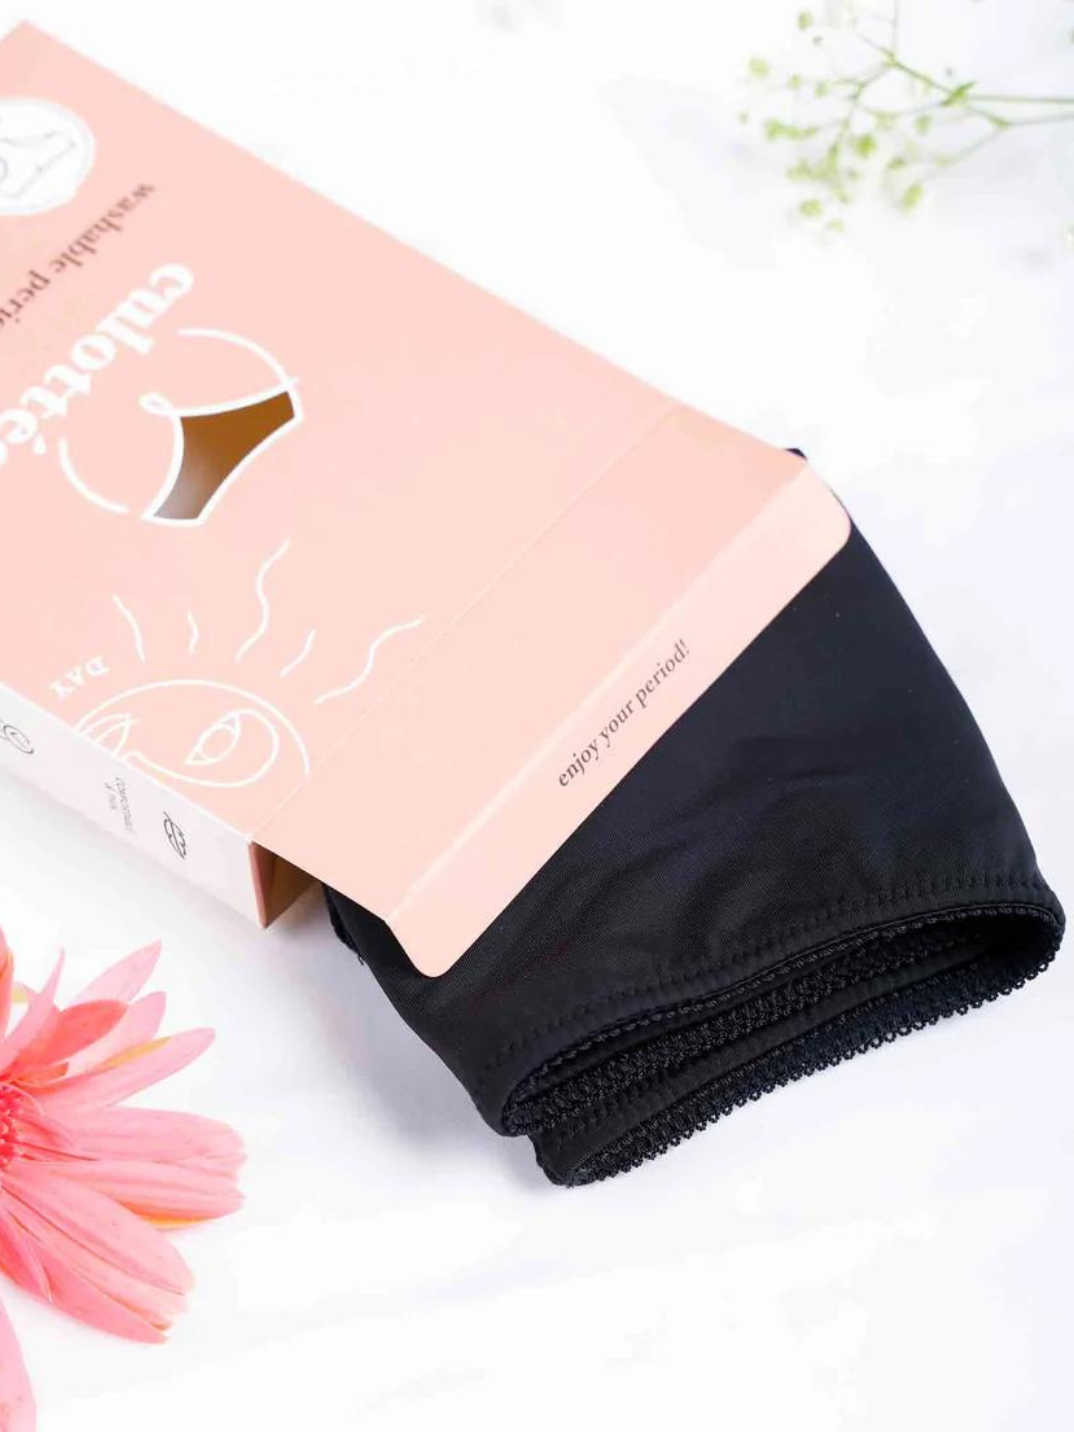 sunny shorty high waisted everyday period briefs shop sustainable women-owned ethically-made underwear